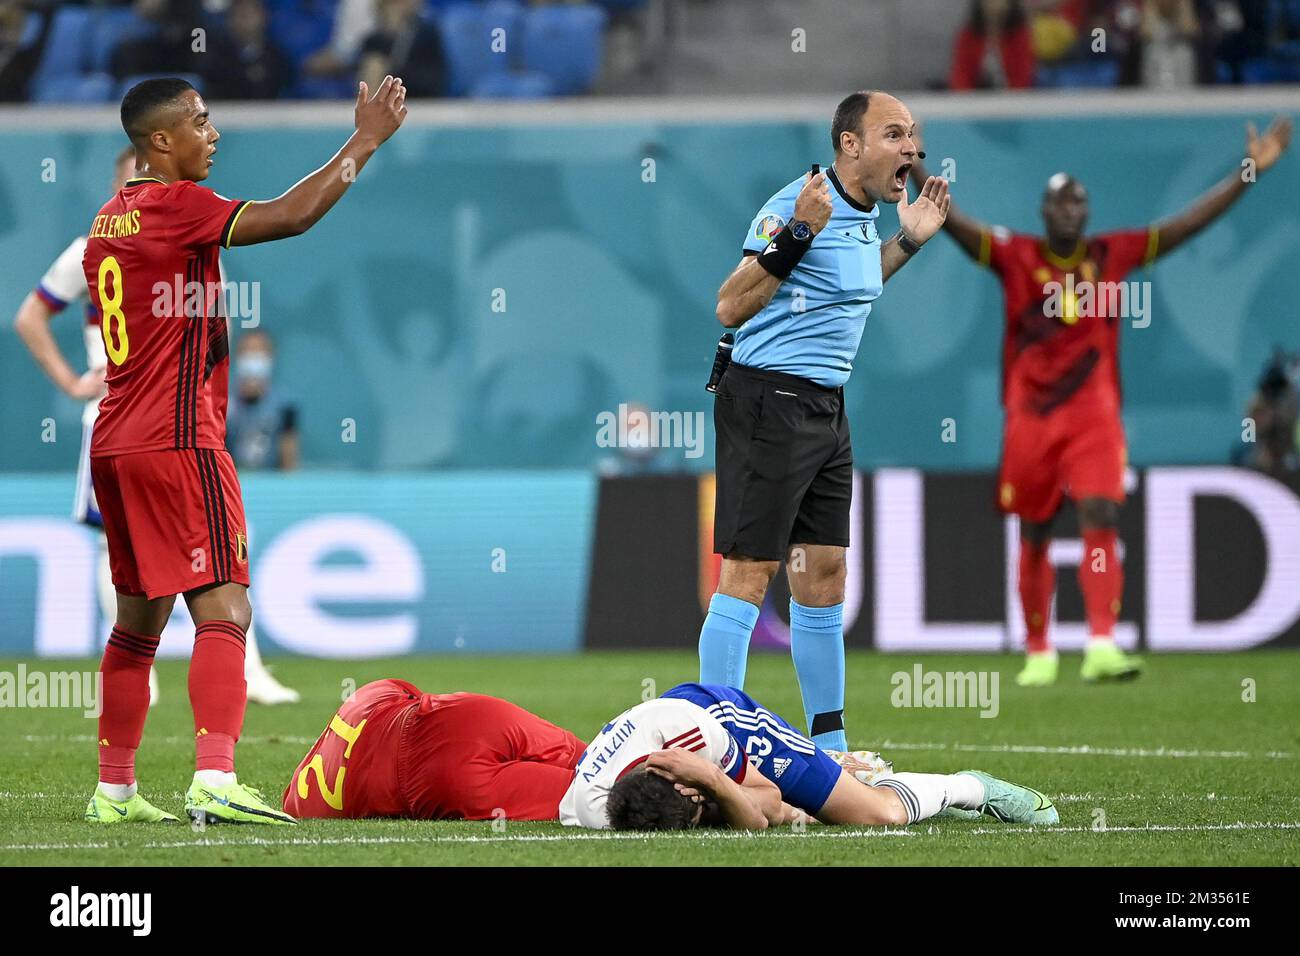 Belgium's Youri Tielemans, Belgium's Timothy Castagne, Russian Daler Kuzyayev and Referee Spanish Antonio Mateu Lahoz pictured during a soccer game between Russia and Belgium's Red Devils, the first game in the group stage (group B) of the 2020 UEFA European Football Championship, on Saturday 12 June 2021 in Saint Petersburg, Russia. BELGA PHOTO DIRK WAEM Stock Photo